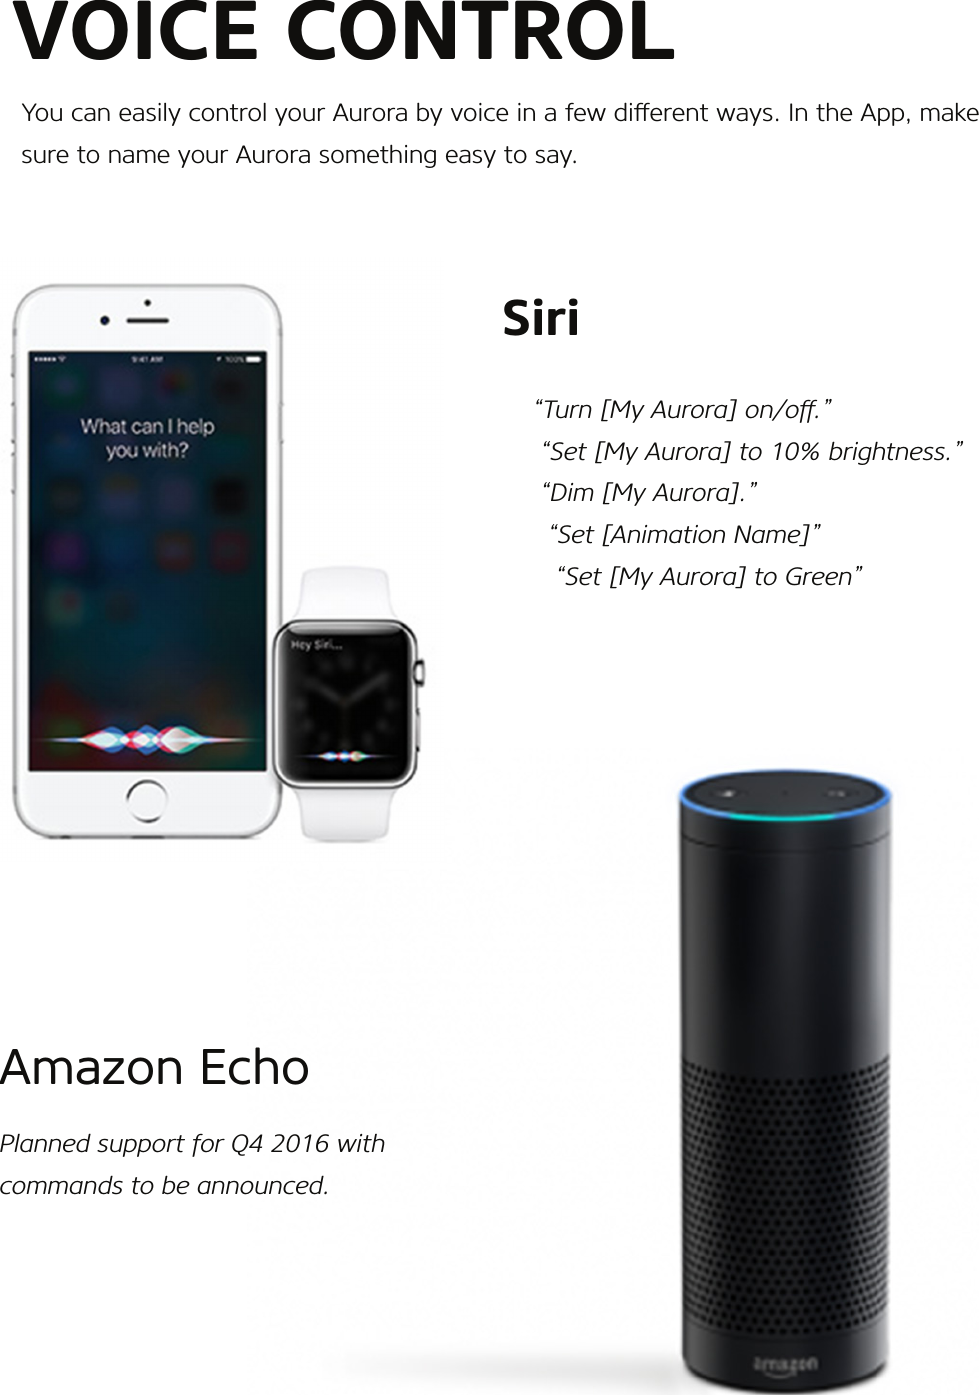    Siri          “Turn [My Aurora] on/o.”           “Set [My Aurora] to 10% brightness.”           “Dim [My Aurora].”            “Set [Animation Name]”             “Set [My Aurora] to Green”Amazon EchoPlanned support for Q4 2016 with commands to be announced.VOICE CONTROLYou can easily control your Aurora by voice in a few dierent ways. In the App, make sure to name your Aurora something easy to say.